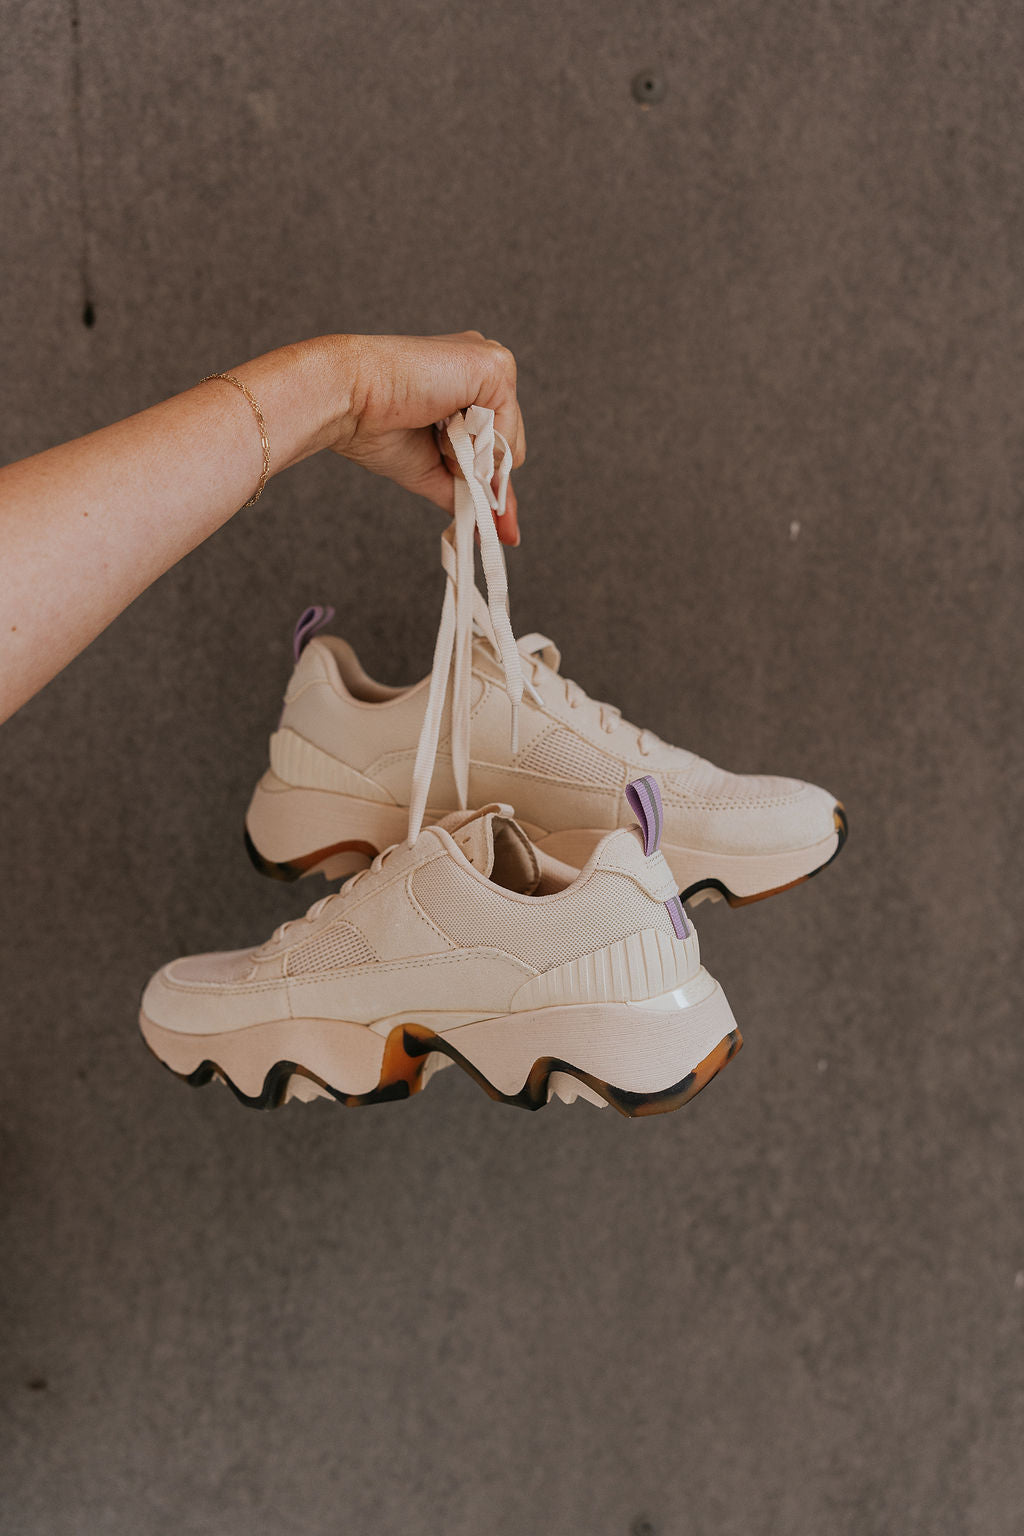 Front side view of female model holding the Kinetic Impact II Wonder Lace Sneaker in Honey White & Euphoric Lilac which features Light Beige Mesh Fabric & Suede/Leather Upper, Tortoise Detail Rubber Sole, Lace Up Details and Lavender Pull Tab .